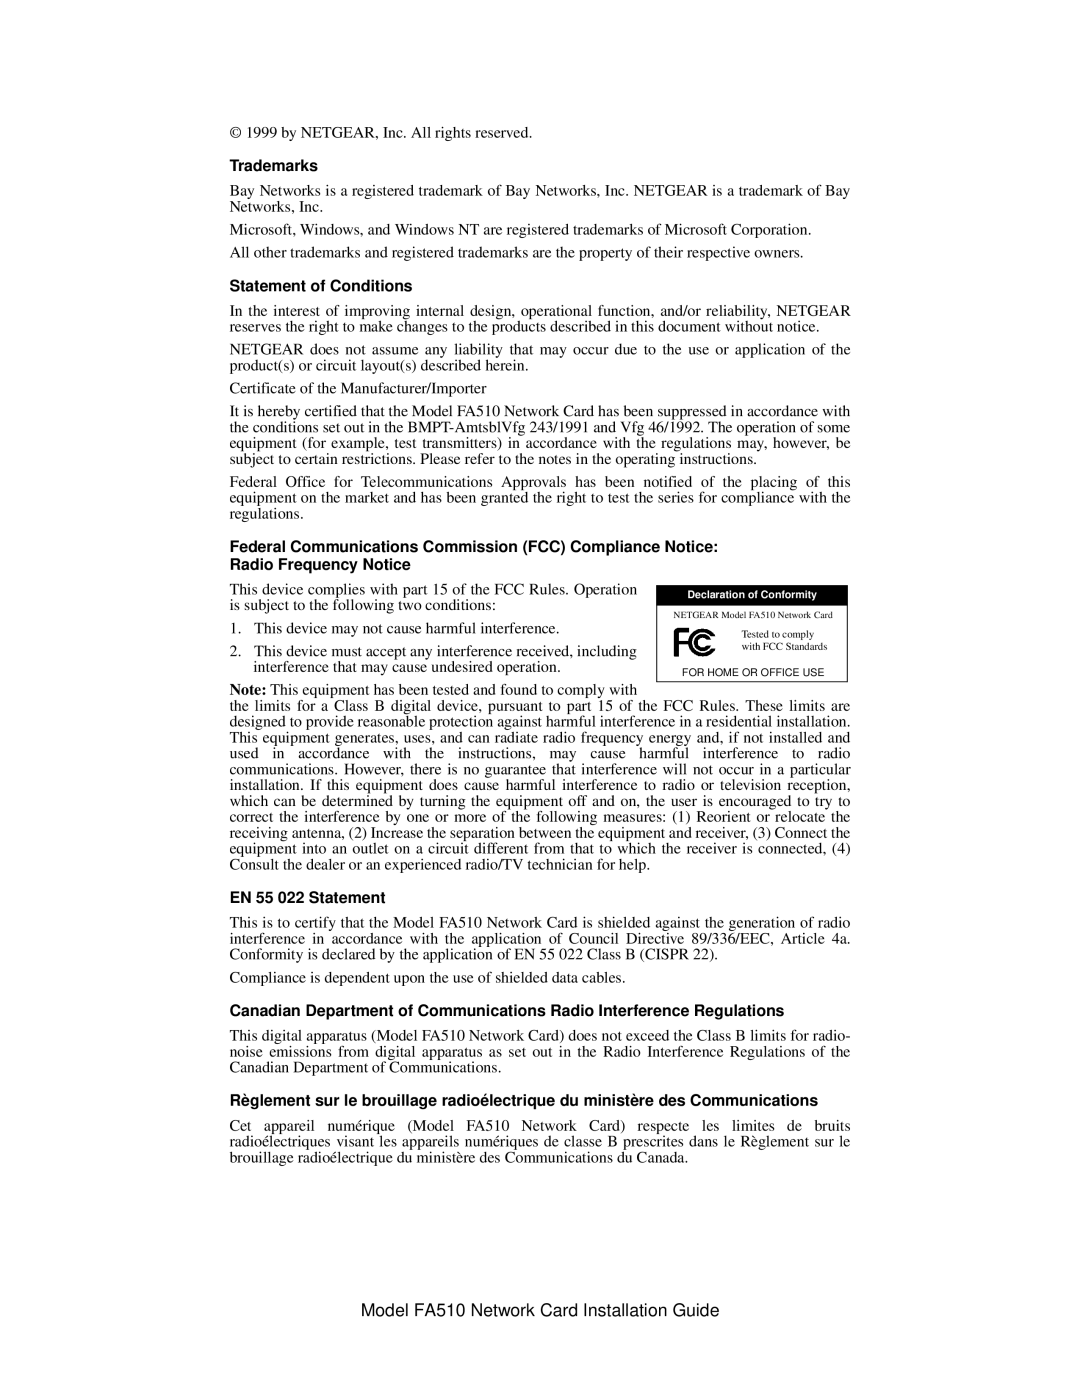 NETGEAR manual Model FA510 Network Card Installation Guide, Trademarks, Statement of Conditions, EN 55 022 Statement 